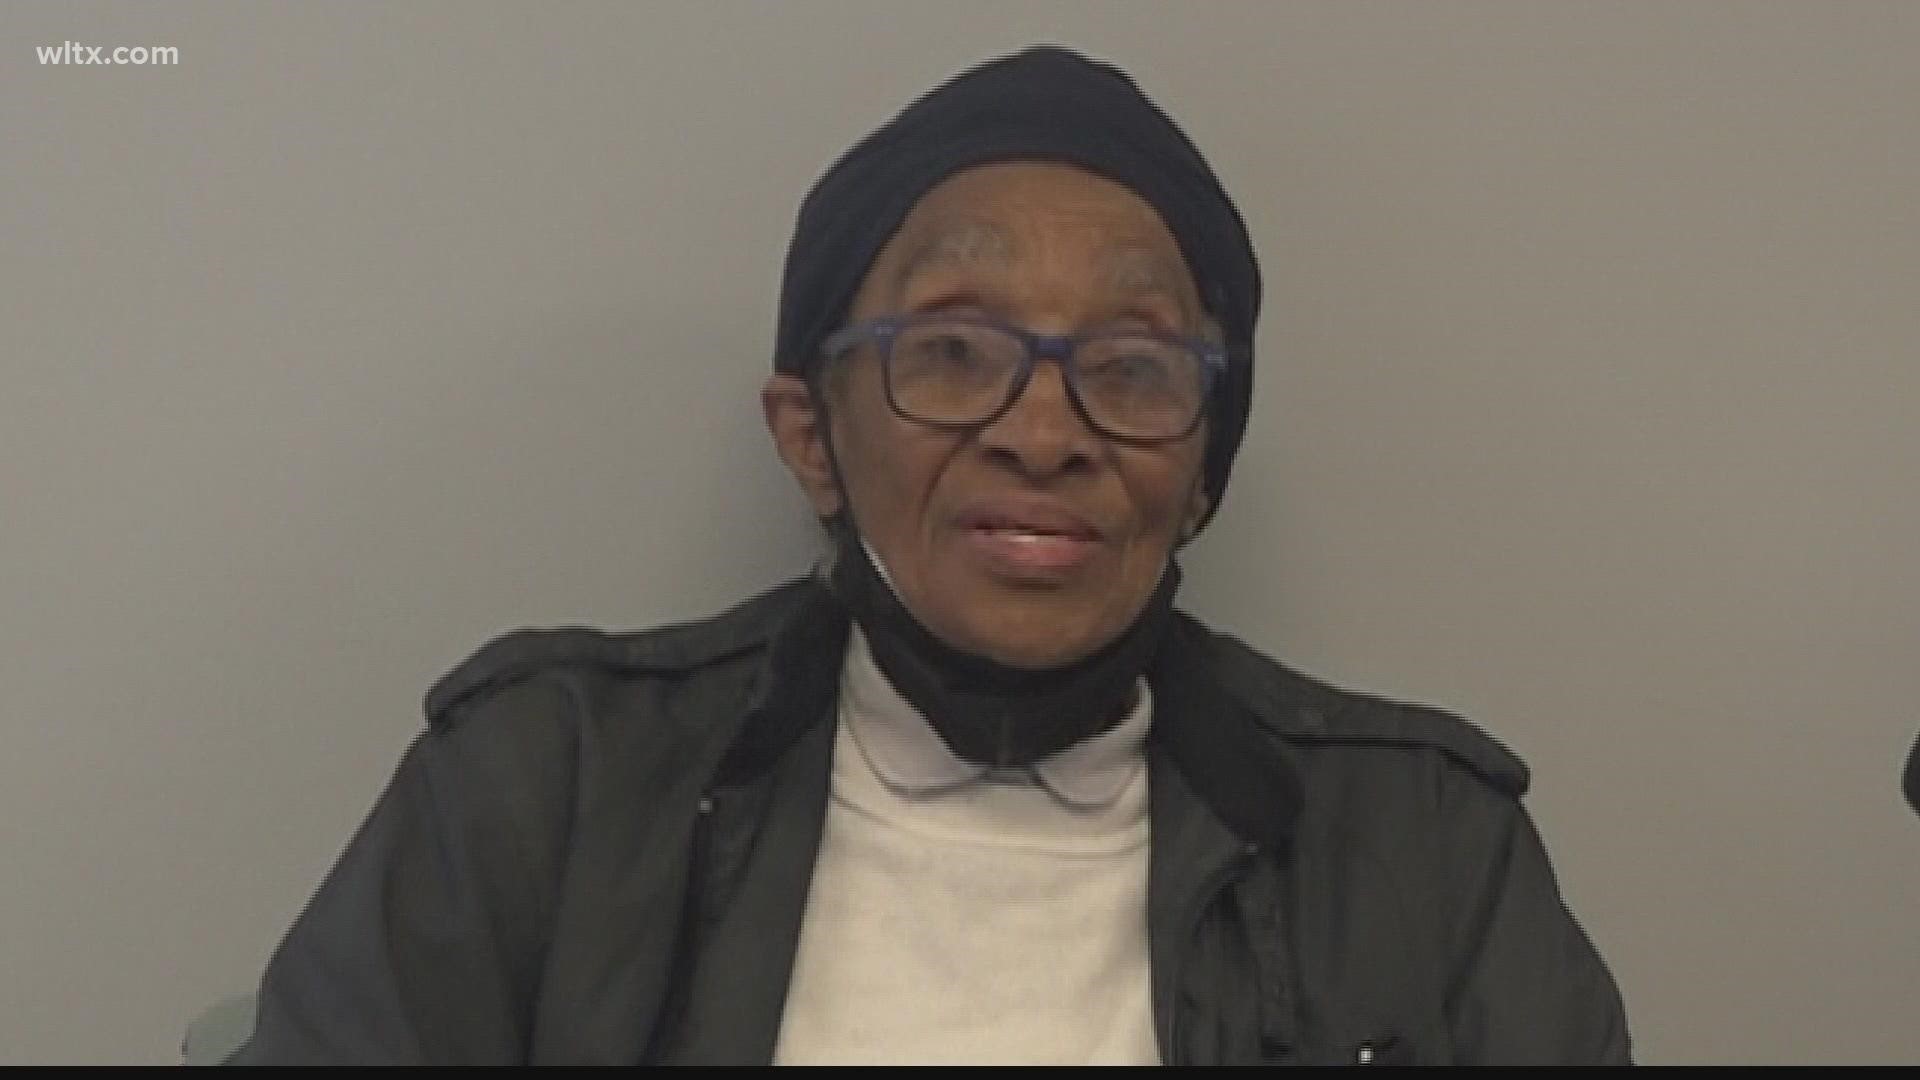 Gladys Mayes is a breast cancer survivor. More than 40 years later, at the age of 88, she's grateful to be alive.